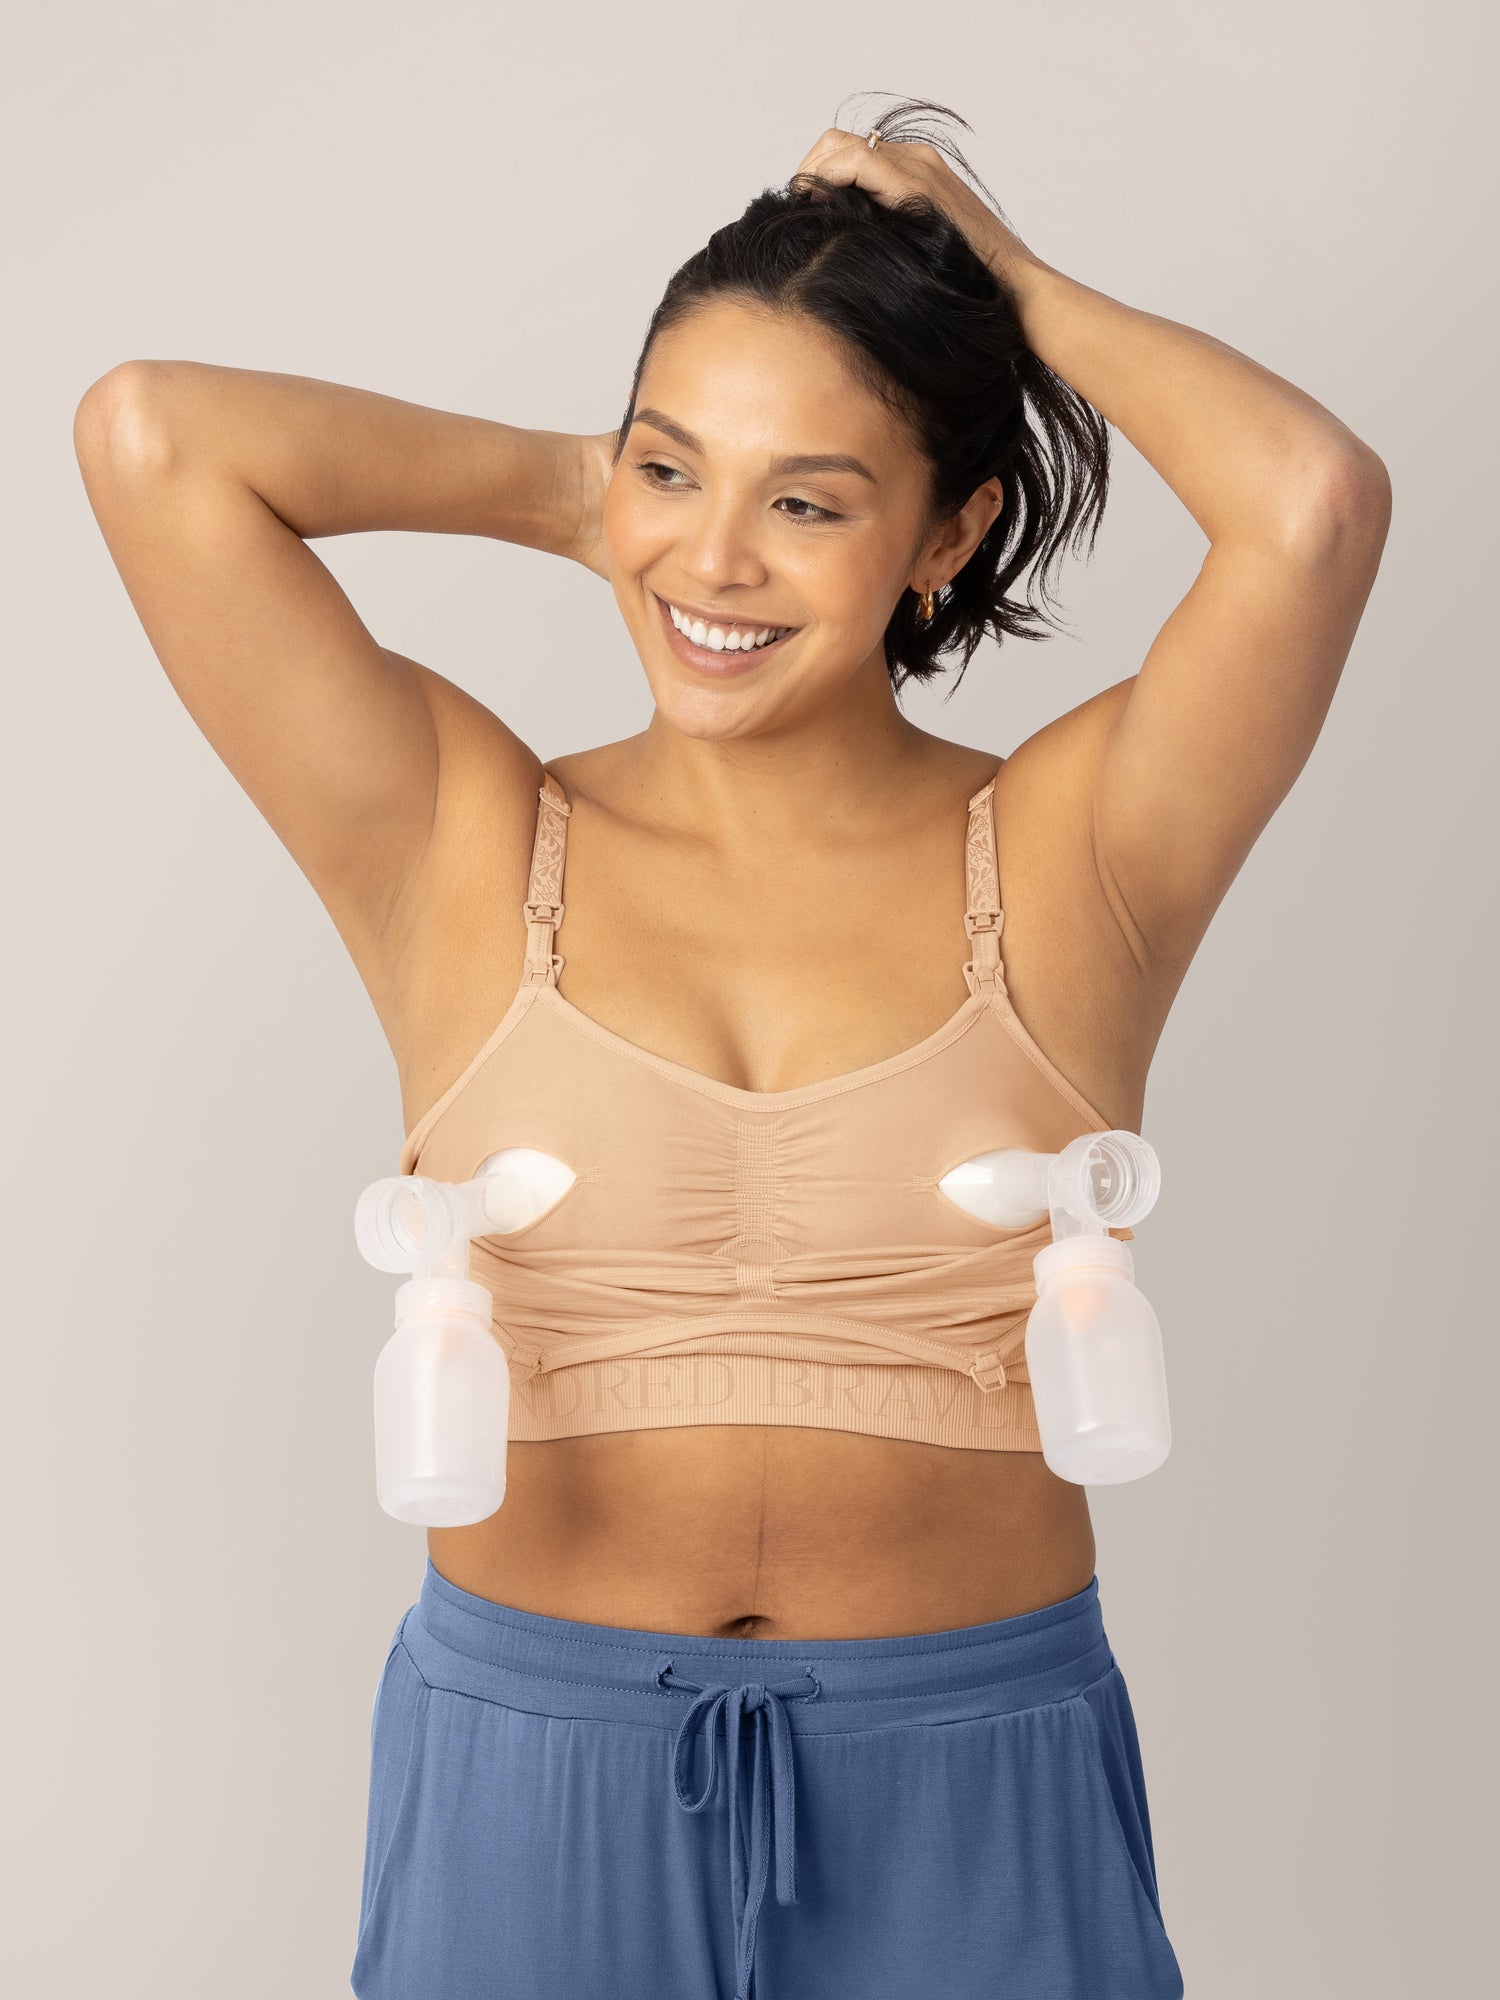 How to Choose the Right Pumping Bra for Your Body